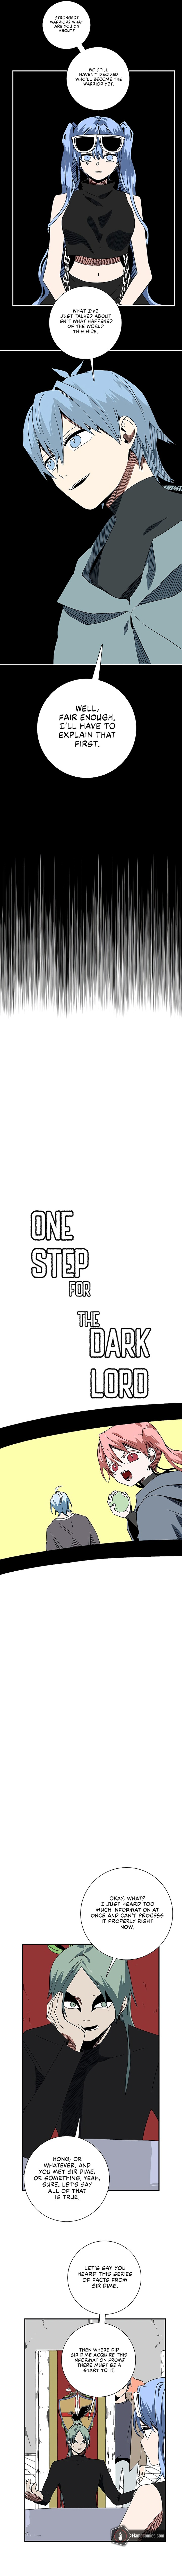 one_step_for_the_dark_lord_99_3